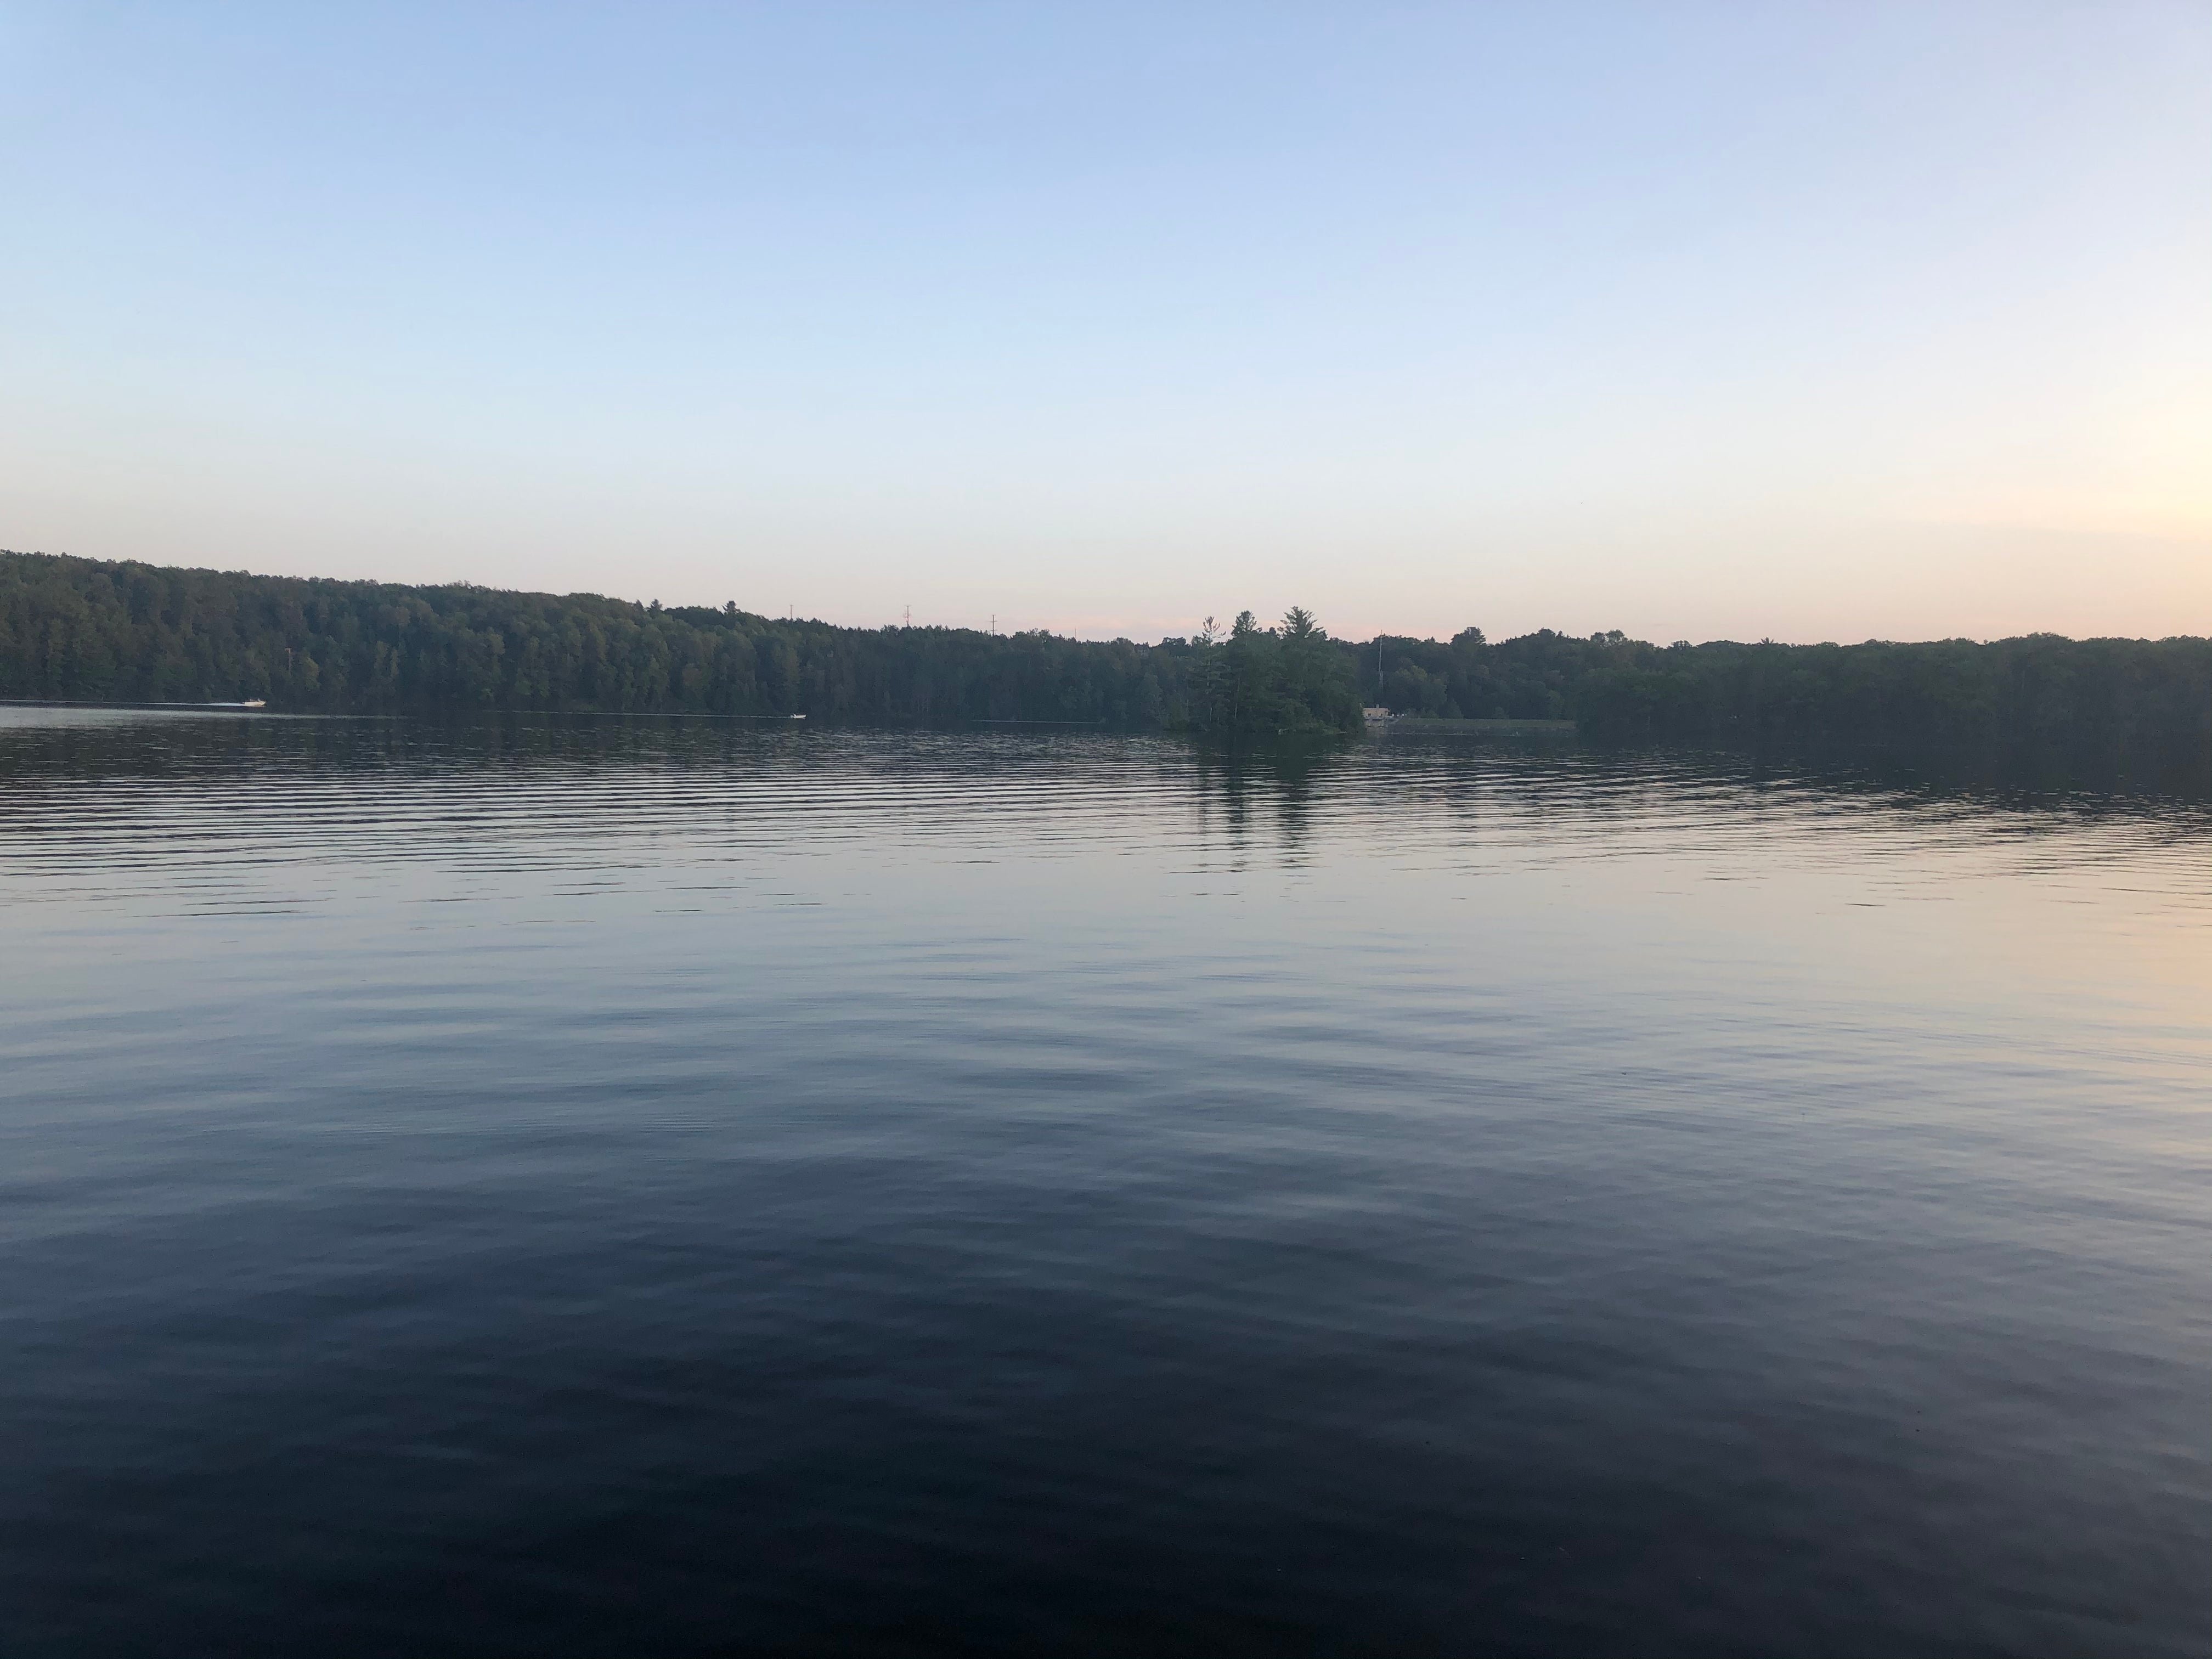 Camper submitted image from Tippy Dam State Recreation Area - 2